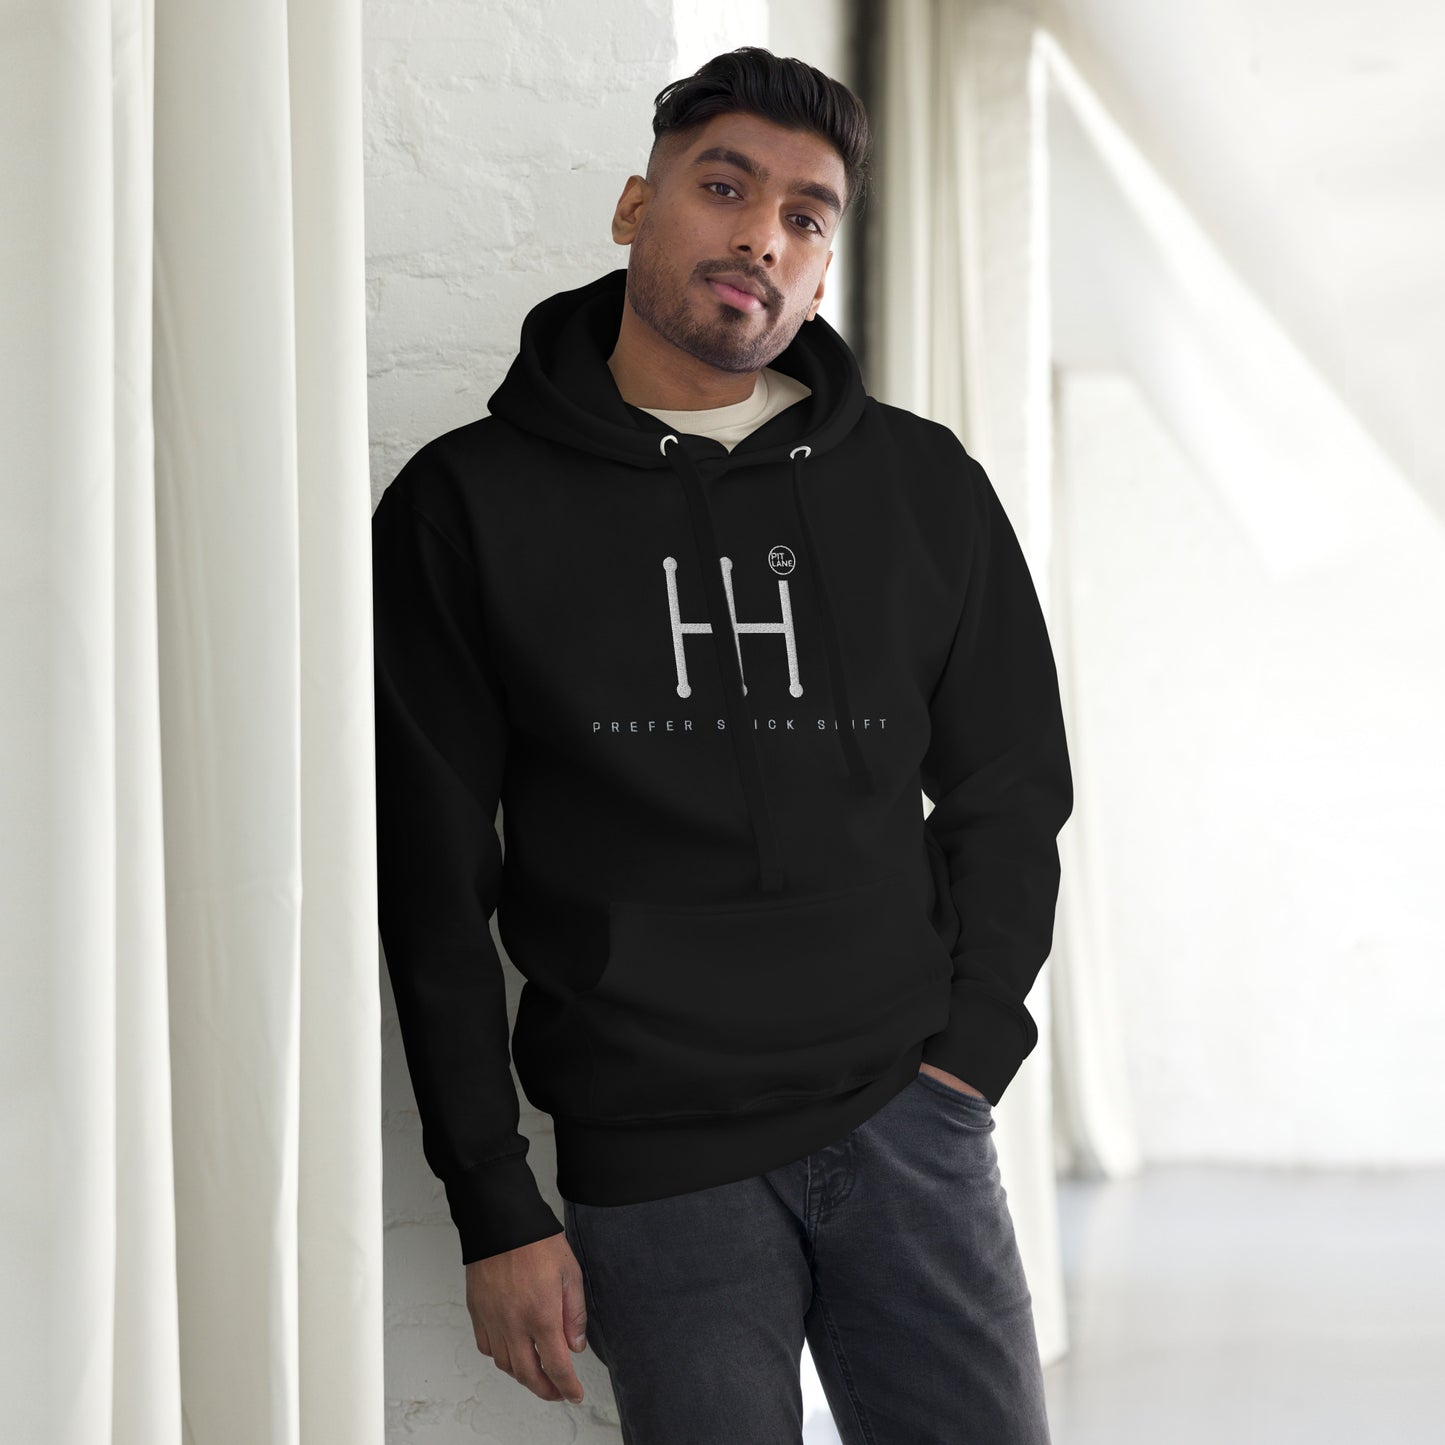 PIT LANE CLOTHING Embroidred Stick Shift Fleece Cotton Racing Hoodie